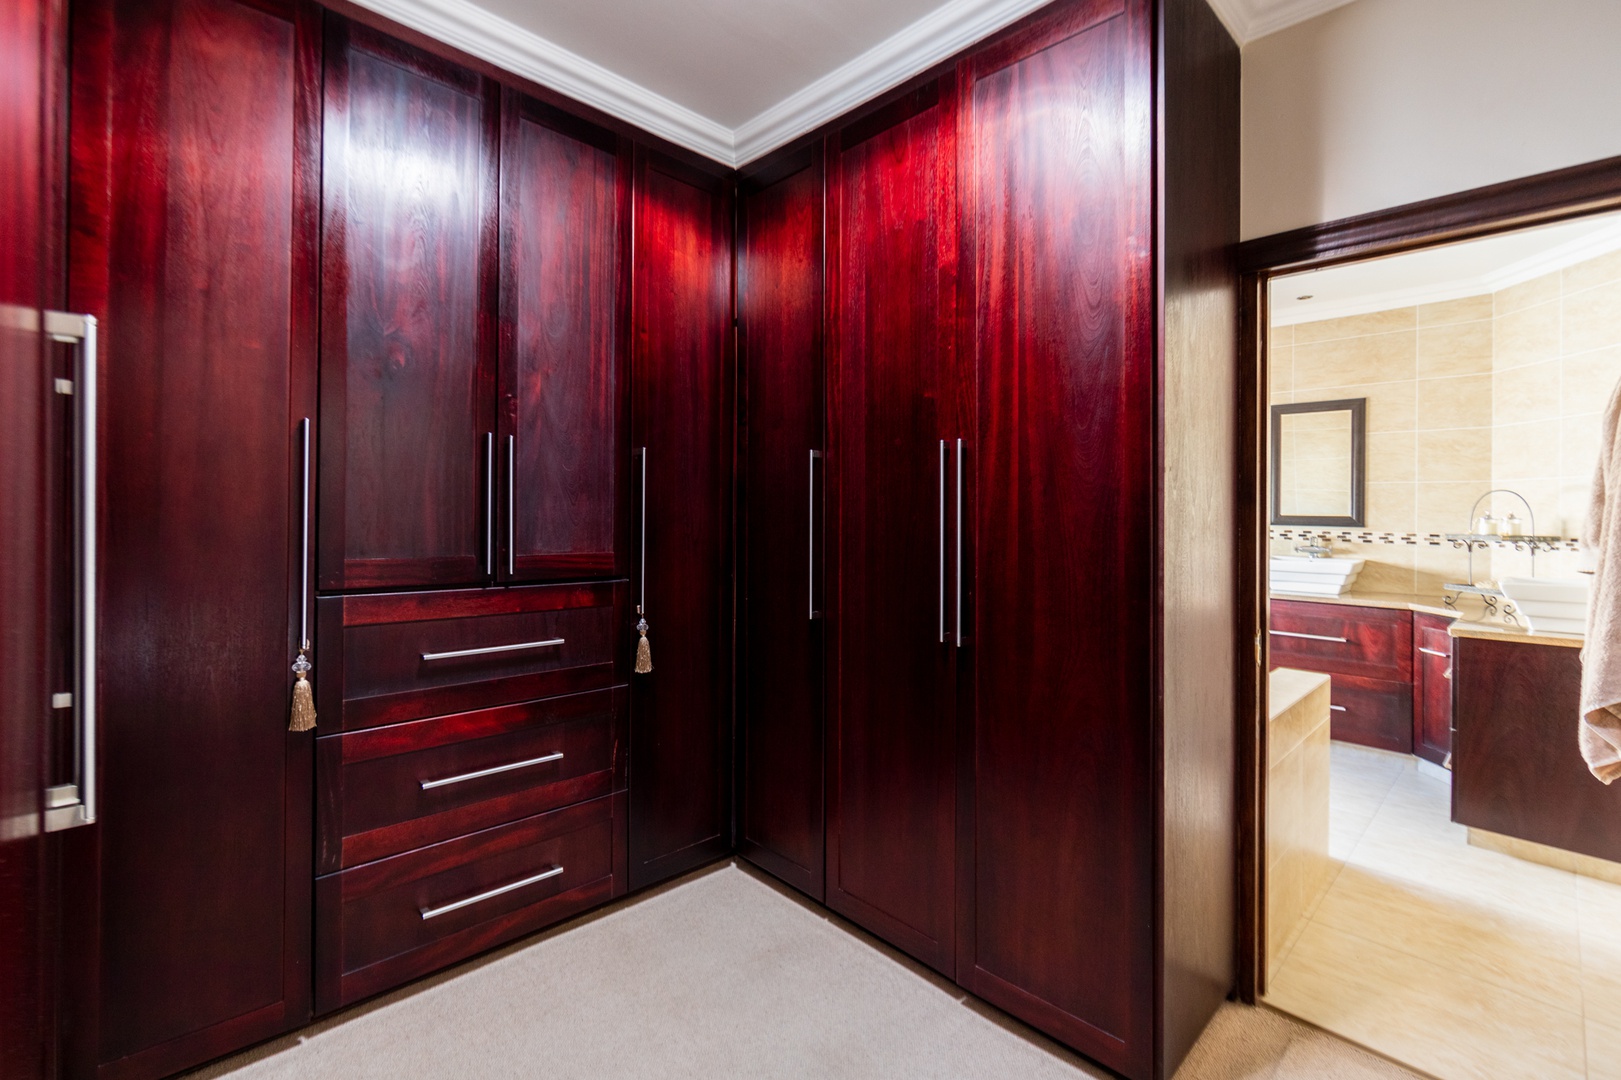 House in Tuscany - Walk in closet